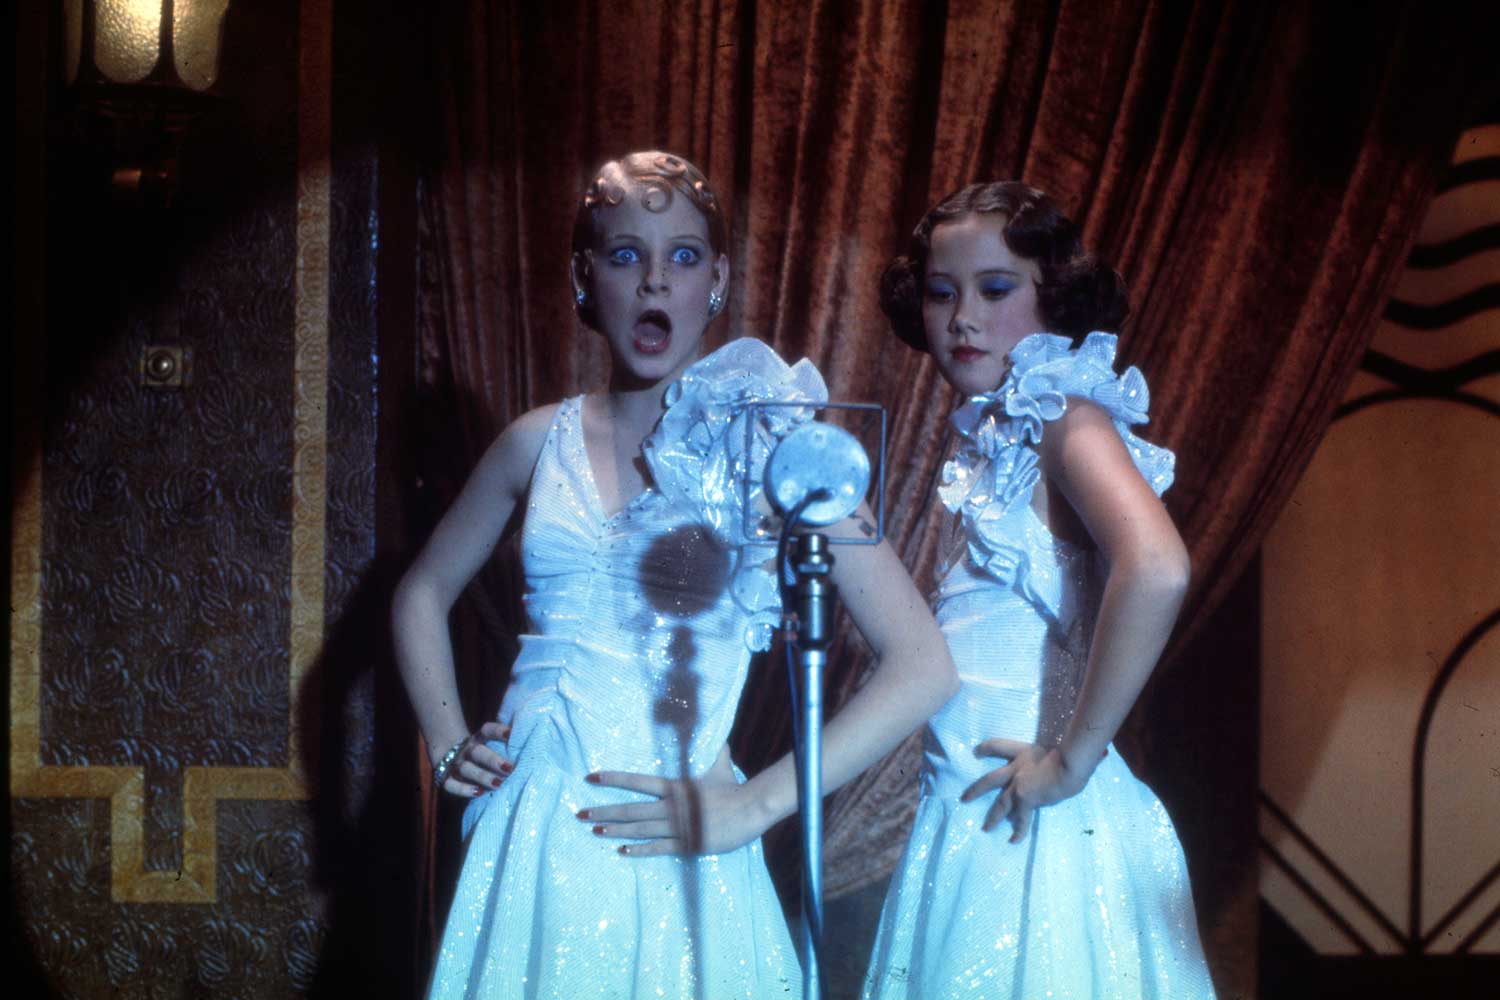 Jodie Foster in scene from Bugsy Malone